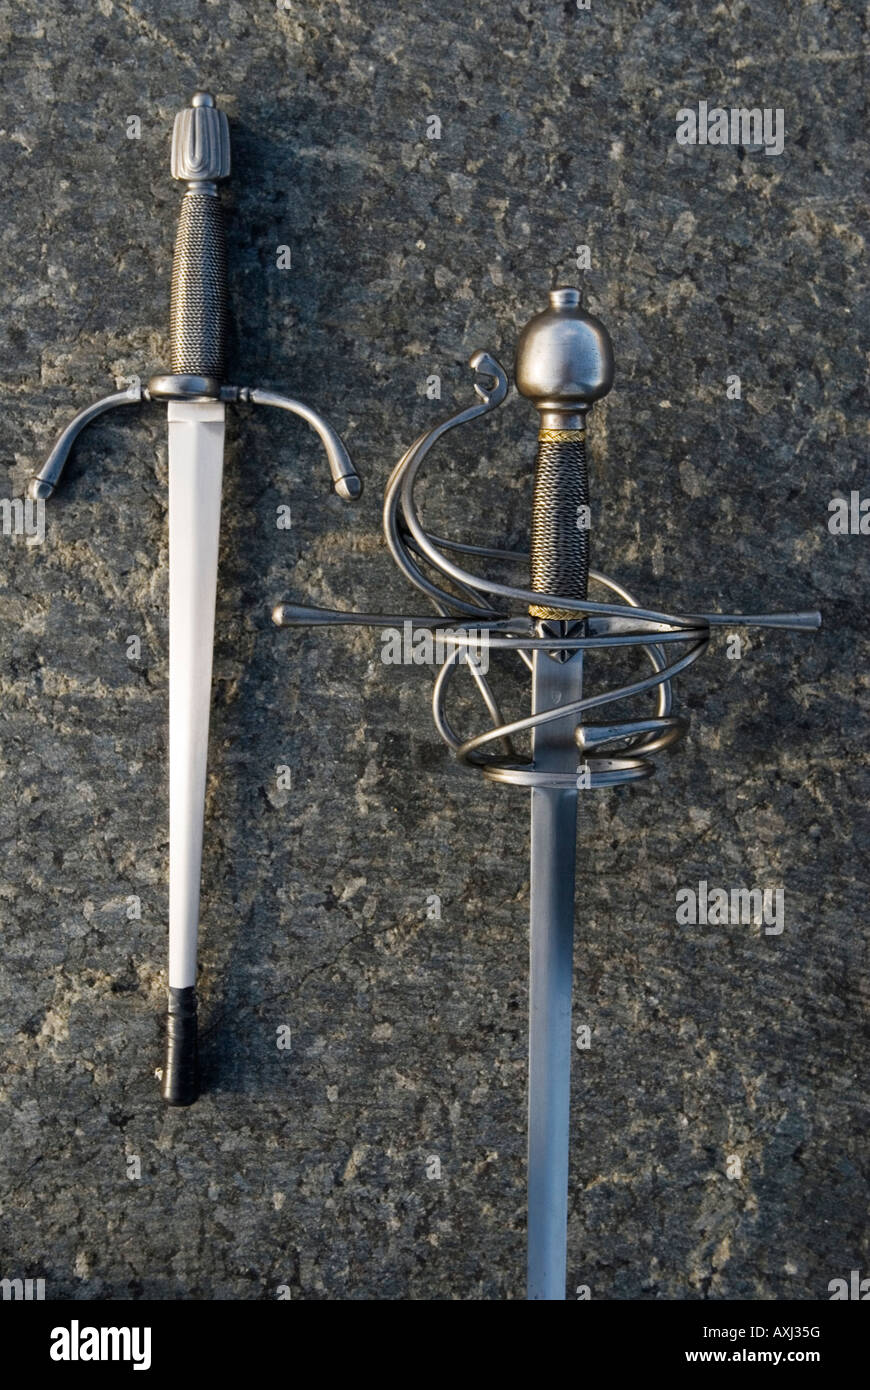 Rapier school Close up of a dagger and rapier sword Used in competitive sport Uk HOMER SYKES Stock Photo